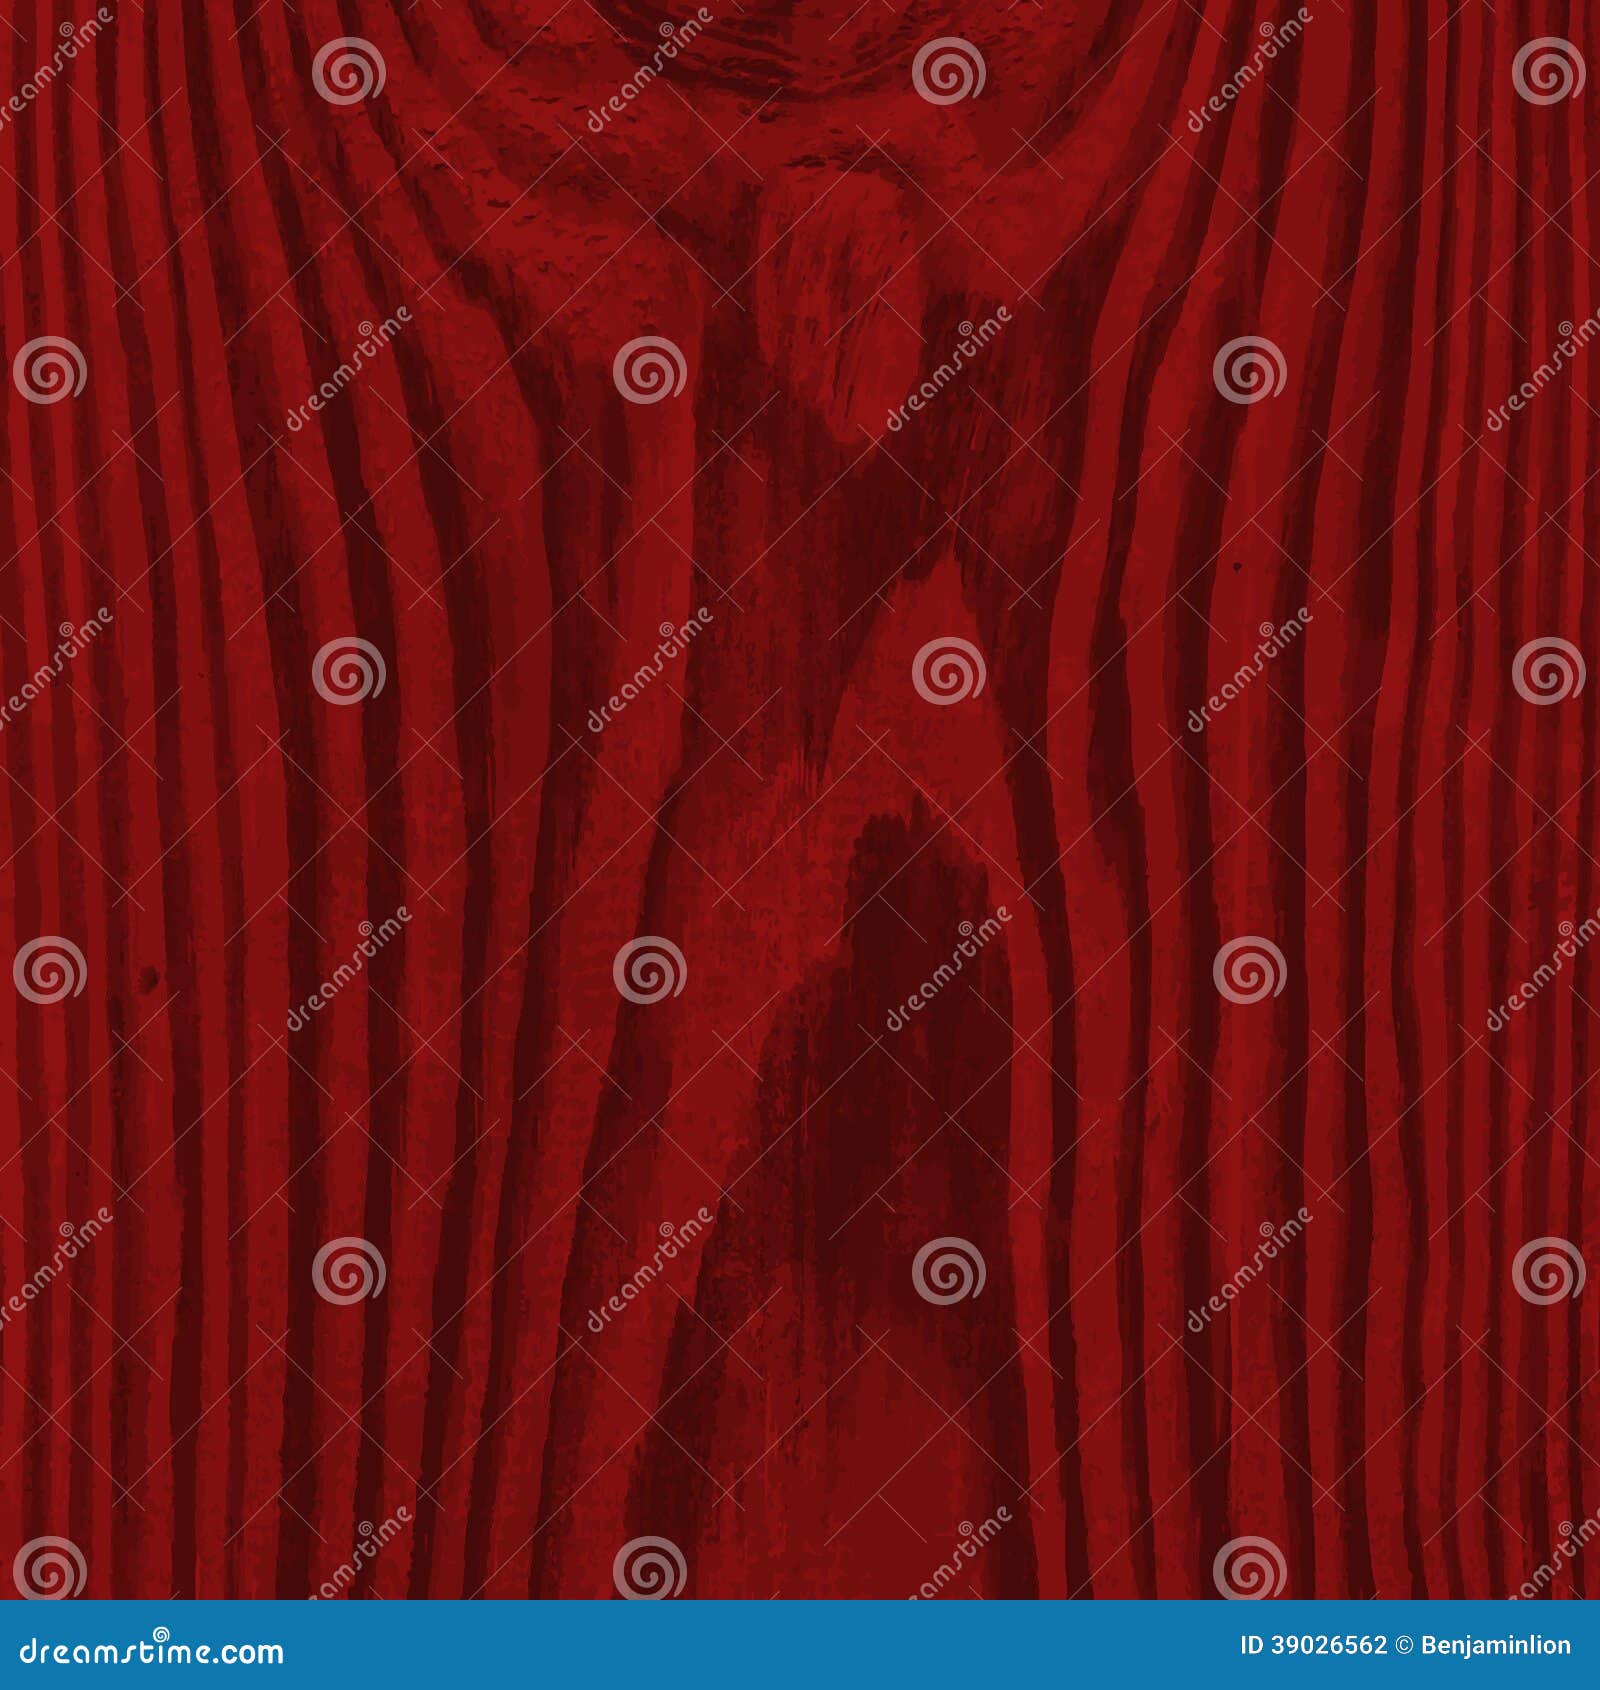 Red Wooden Board Textured Cellphone Wallpaper Images Free Download on  Lovepik  400342188